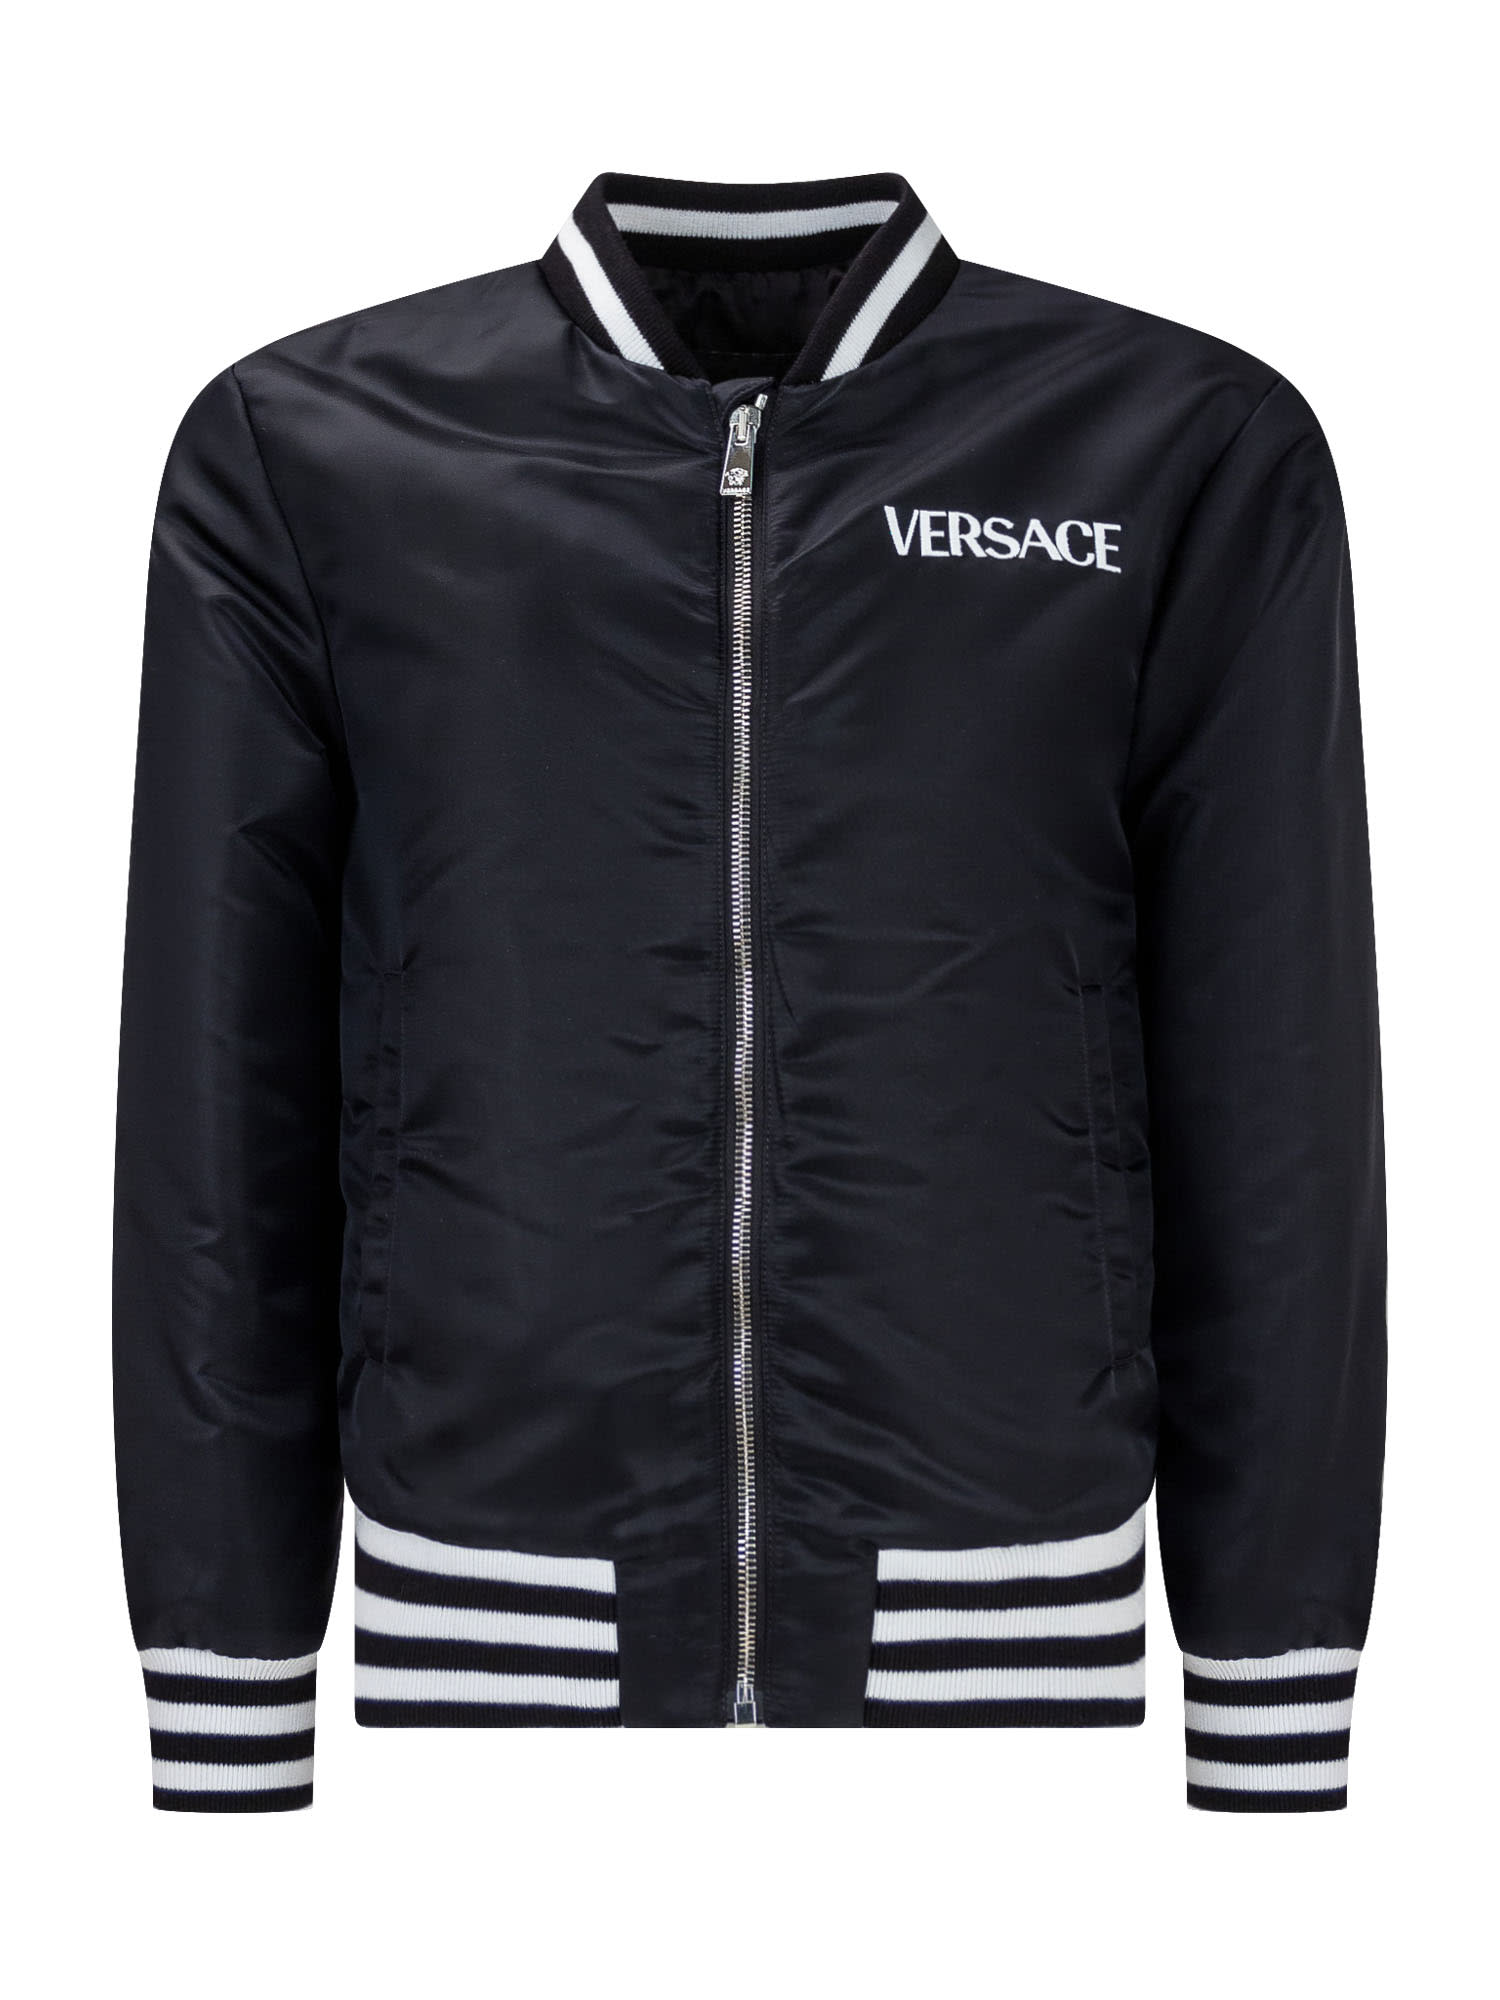 VERSACE JACKET WITH PRINT